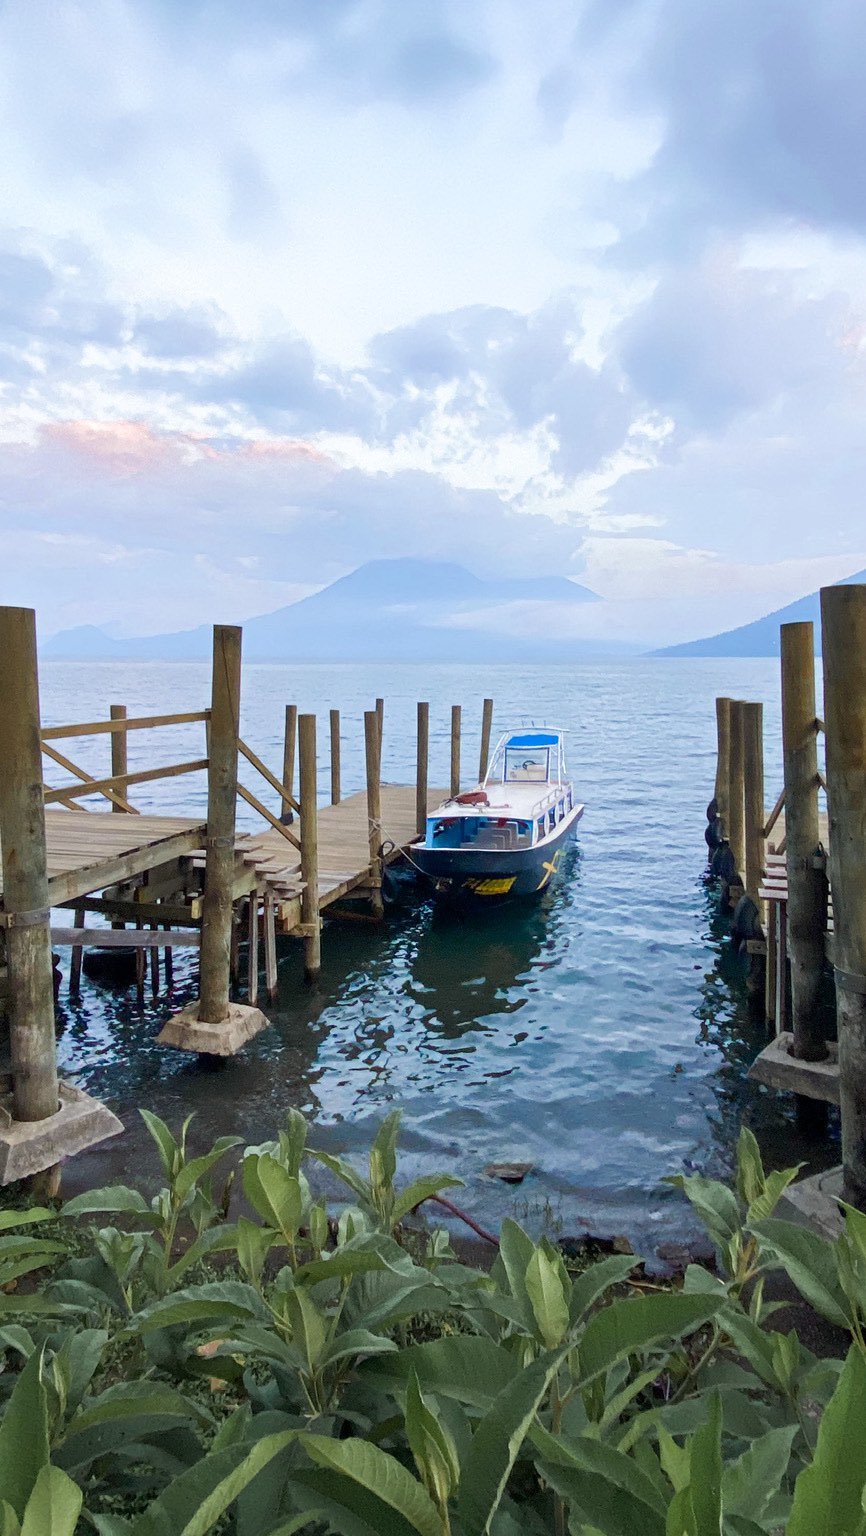 San Marcos La Laguna, located in Lake Atitlan haves many things to offer that might interest you: the nature reserve “Ce